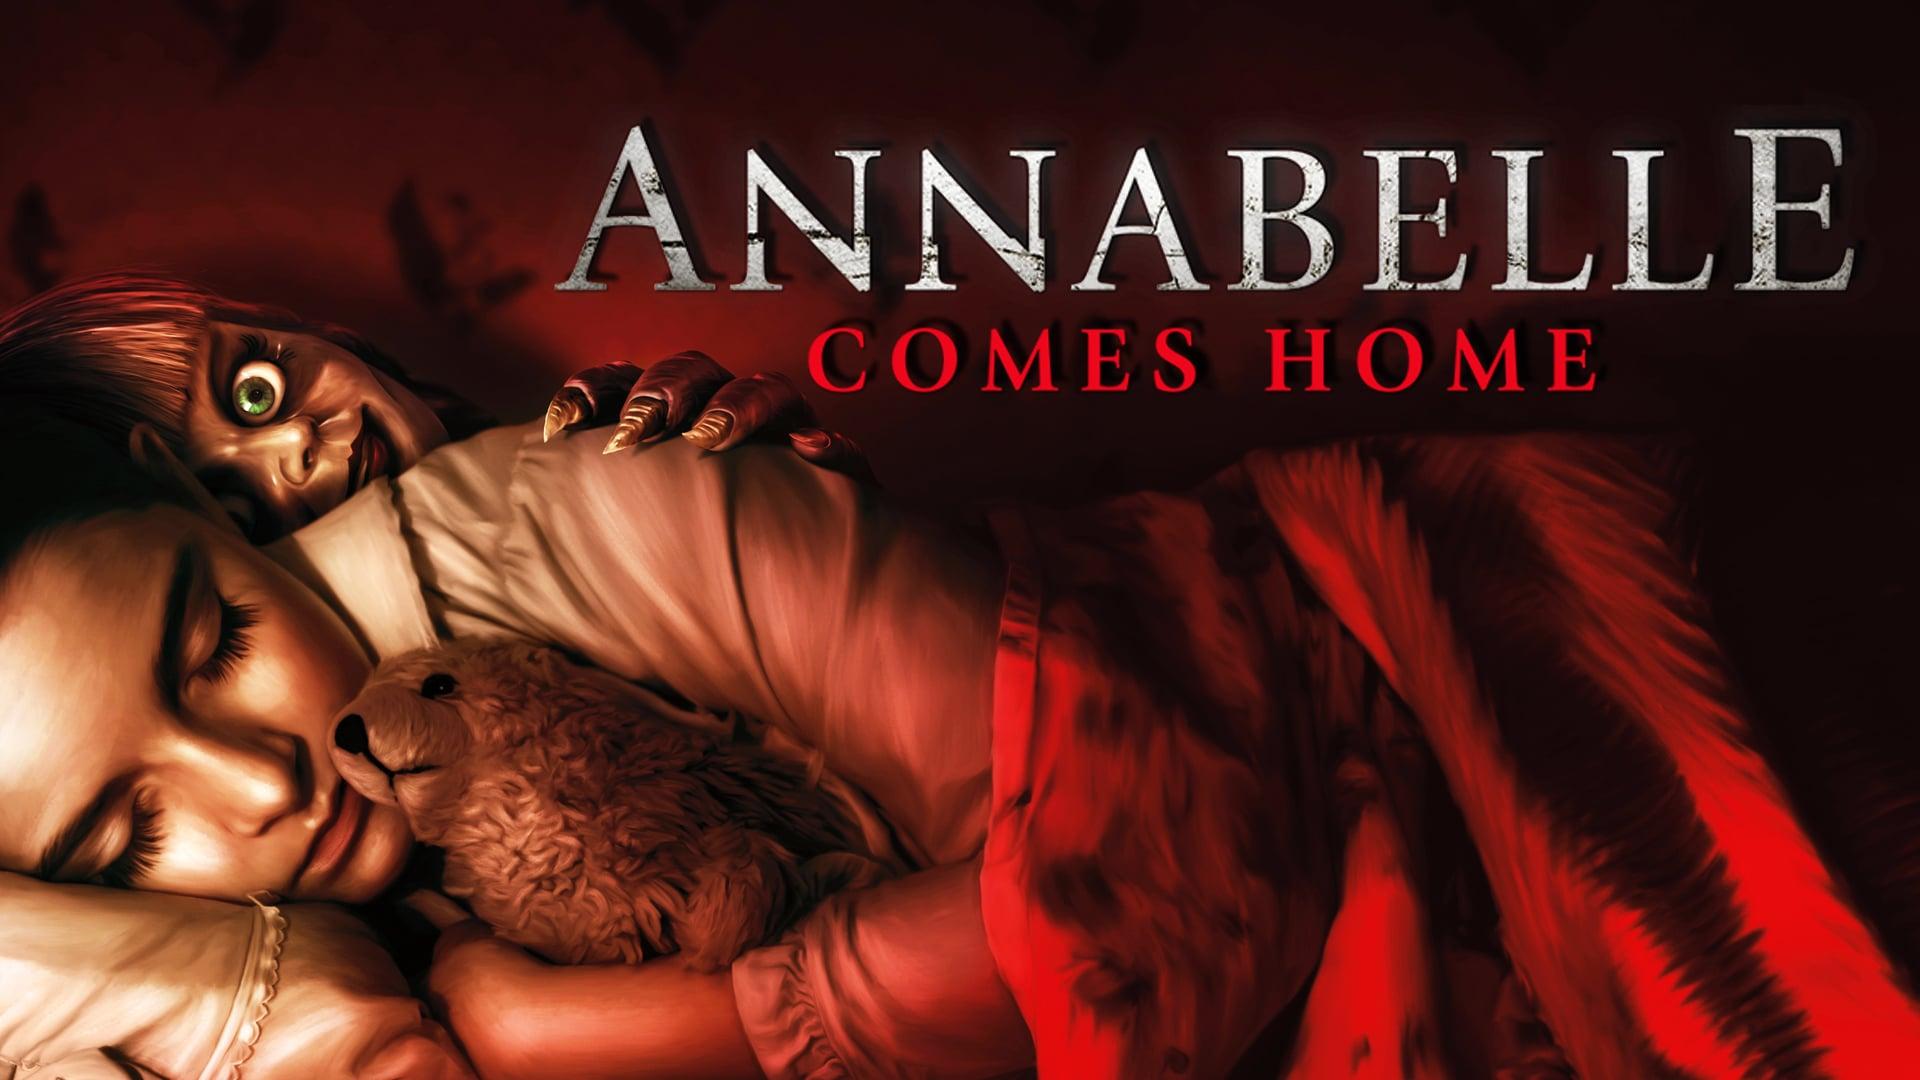 Movie Full Google Docs Annabelle Comes Home 19 Google Drive Mp4